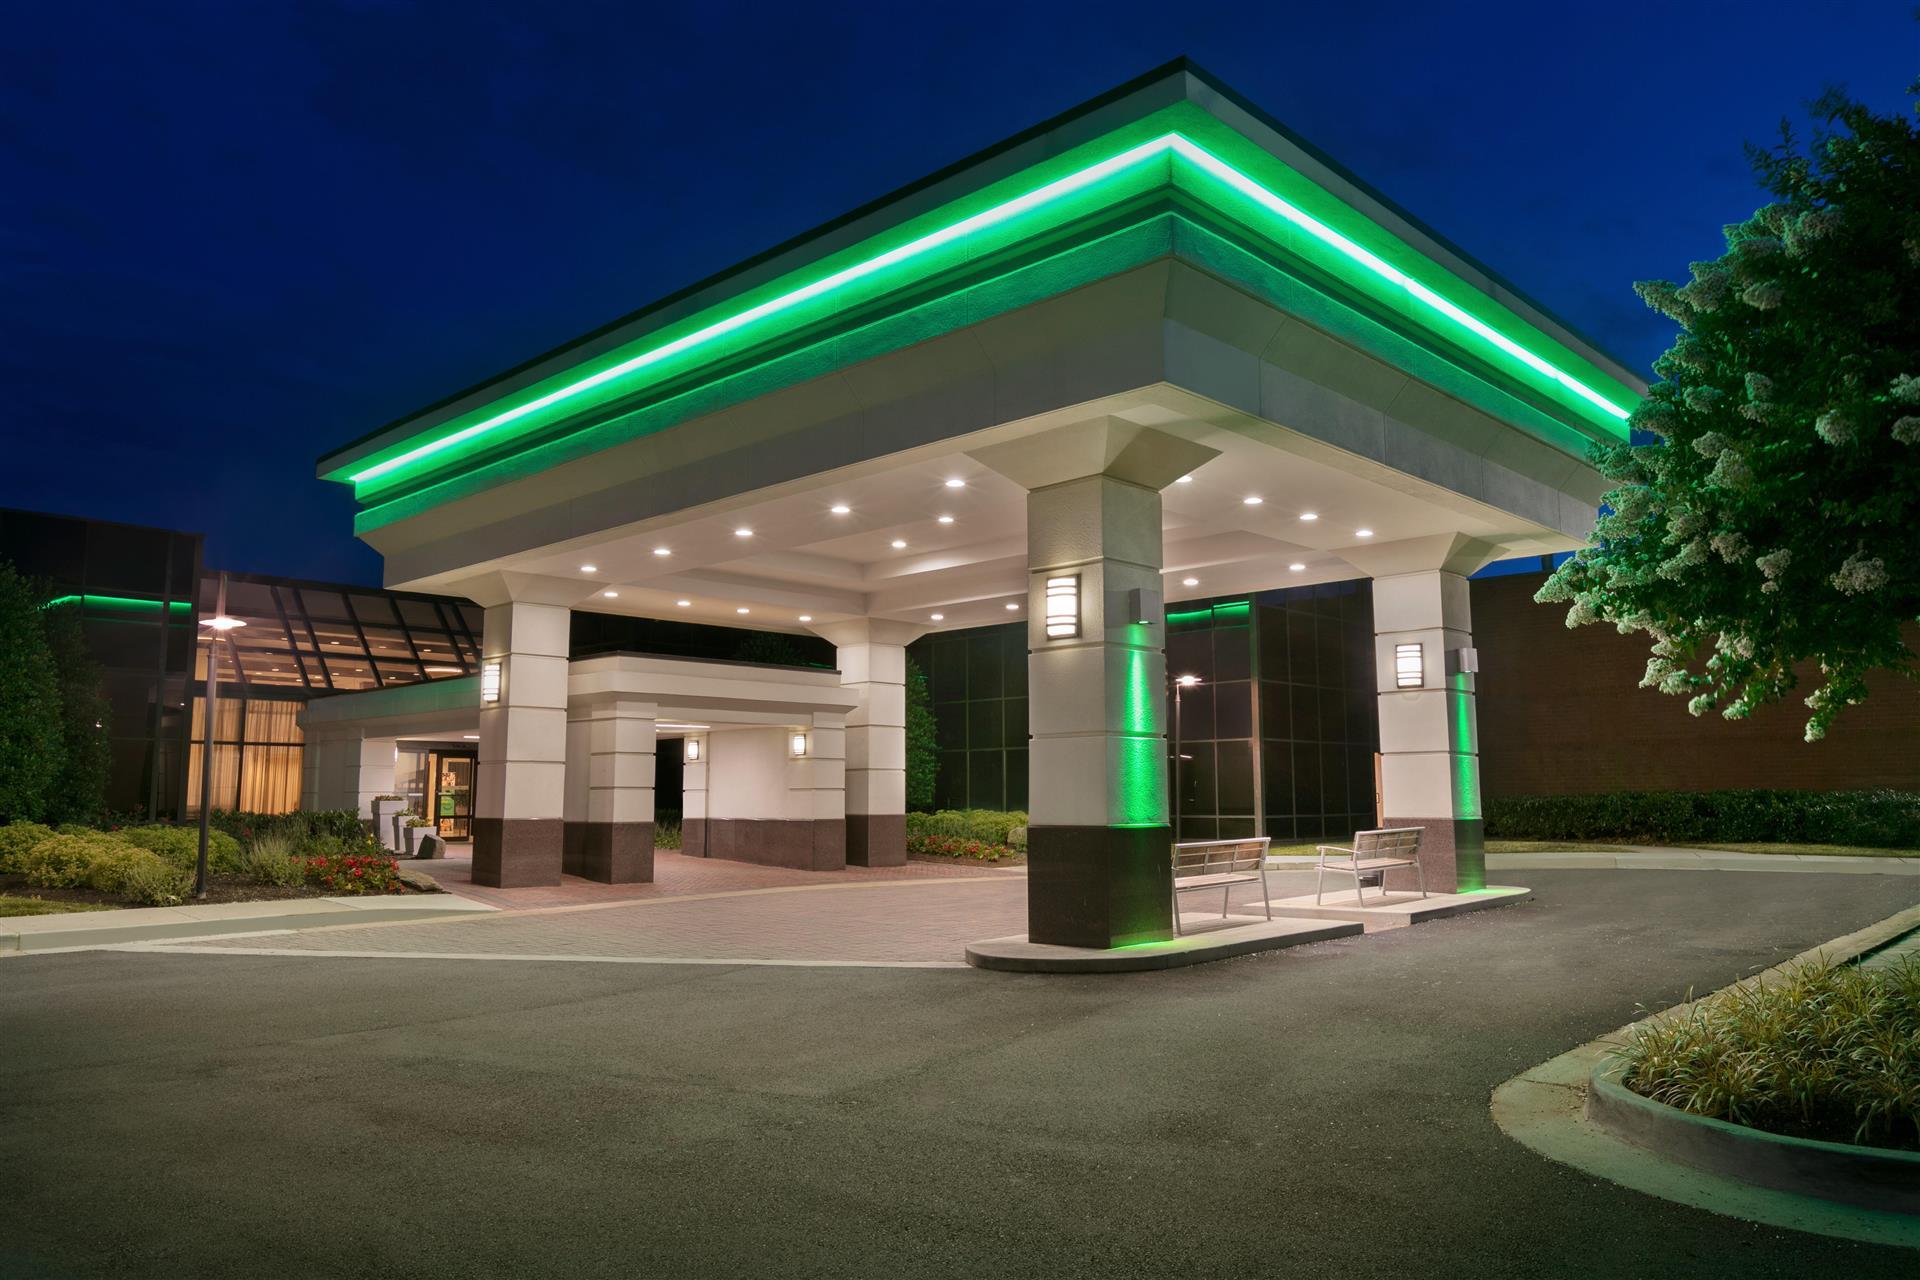 Holiday Inn Washington Dulles Hotel and Conference Center in Dulles, VA